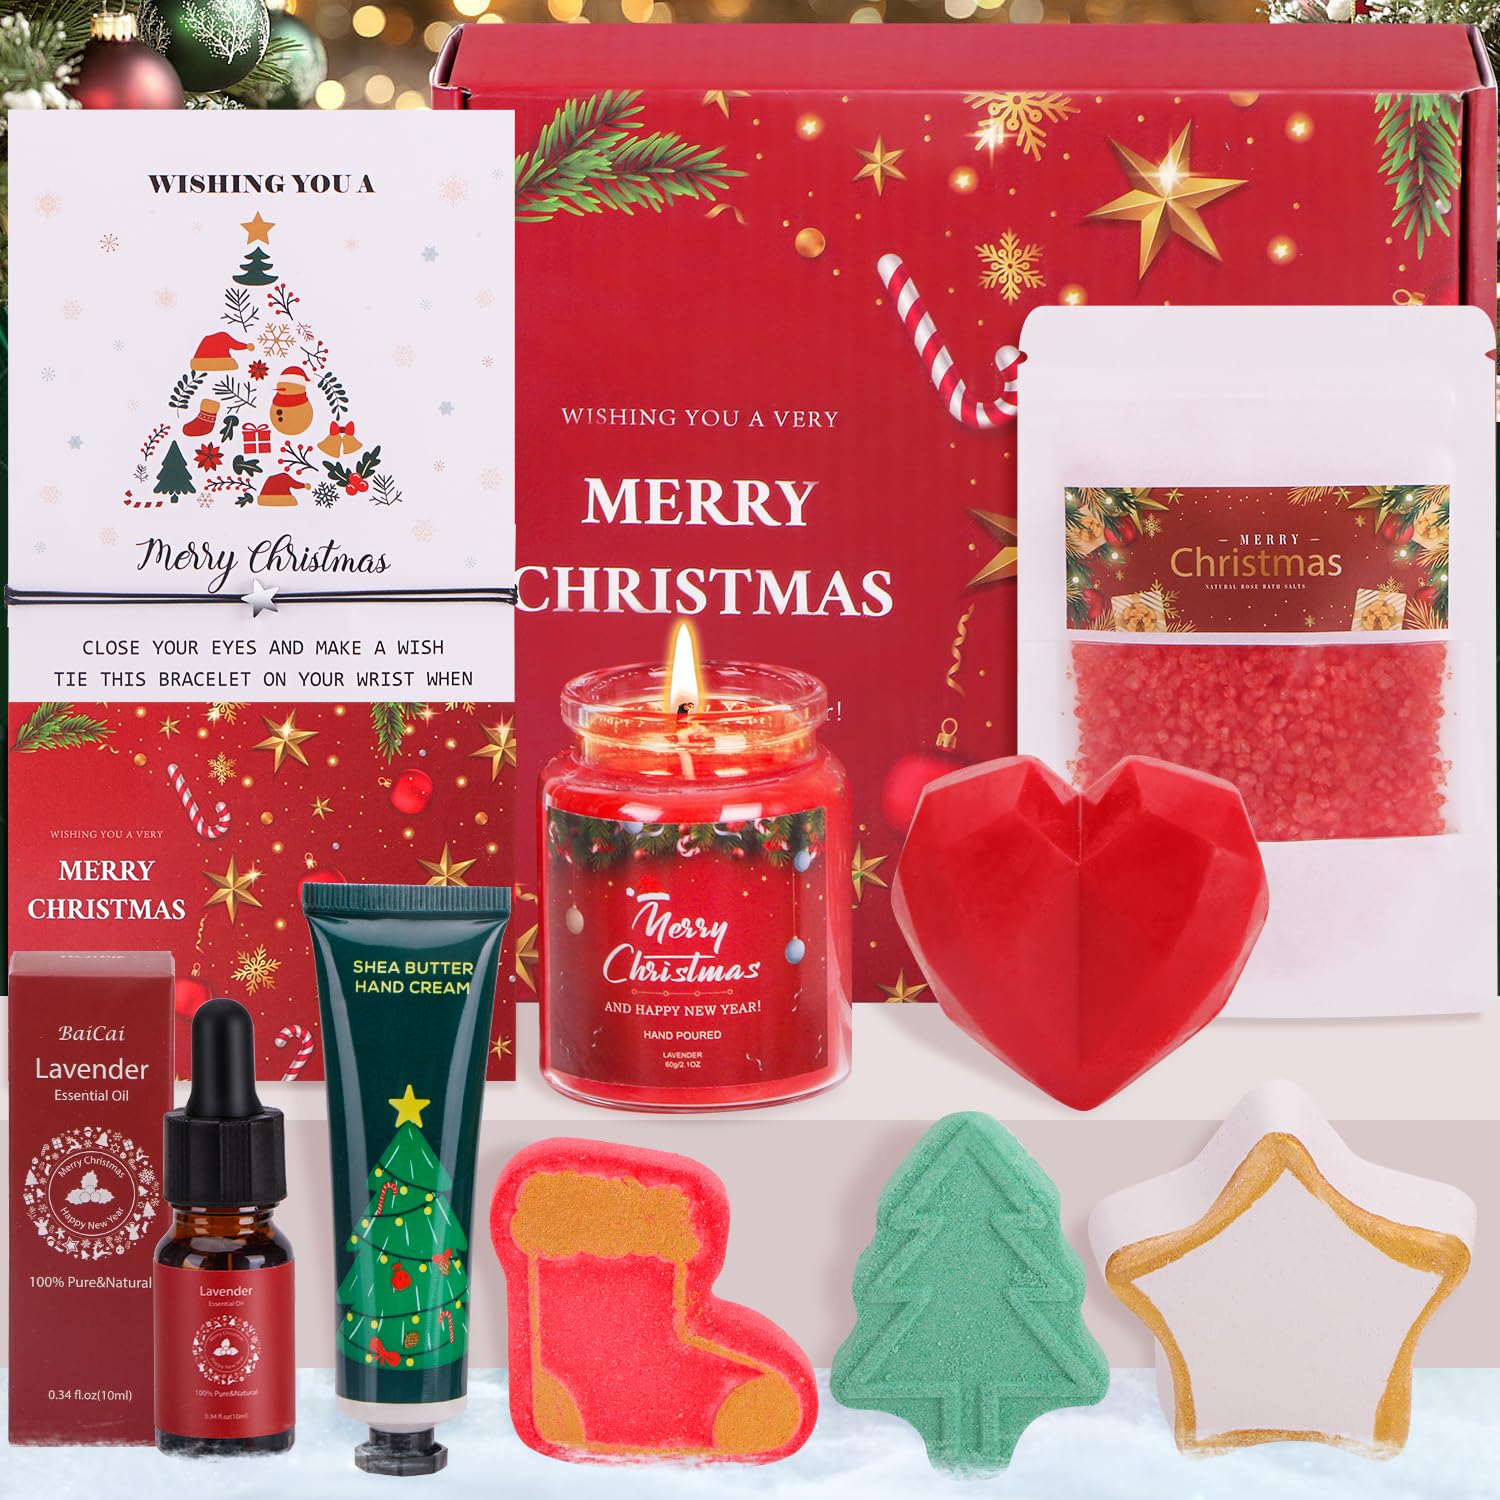 2023 Christmas Pamper Gifts for Women, Christmas Pamper Hampers for Women Self Care Package for Her, Relaxation Spa Gifts Set Xmas Presents Gifts Ideas for Women Best Friend, Sister, Bestie, Mum, Her